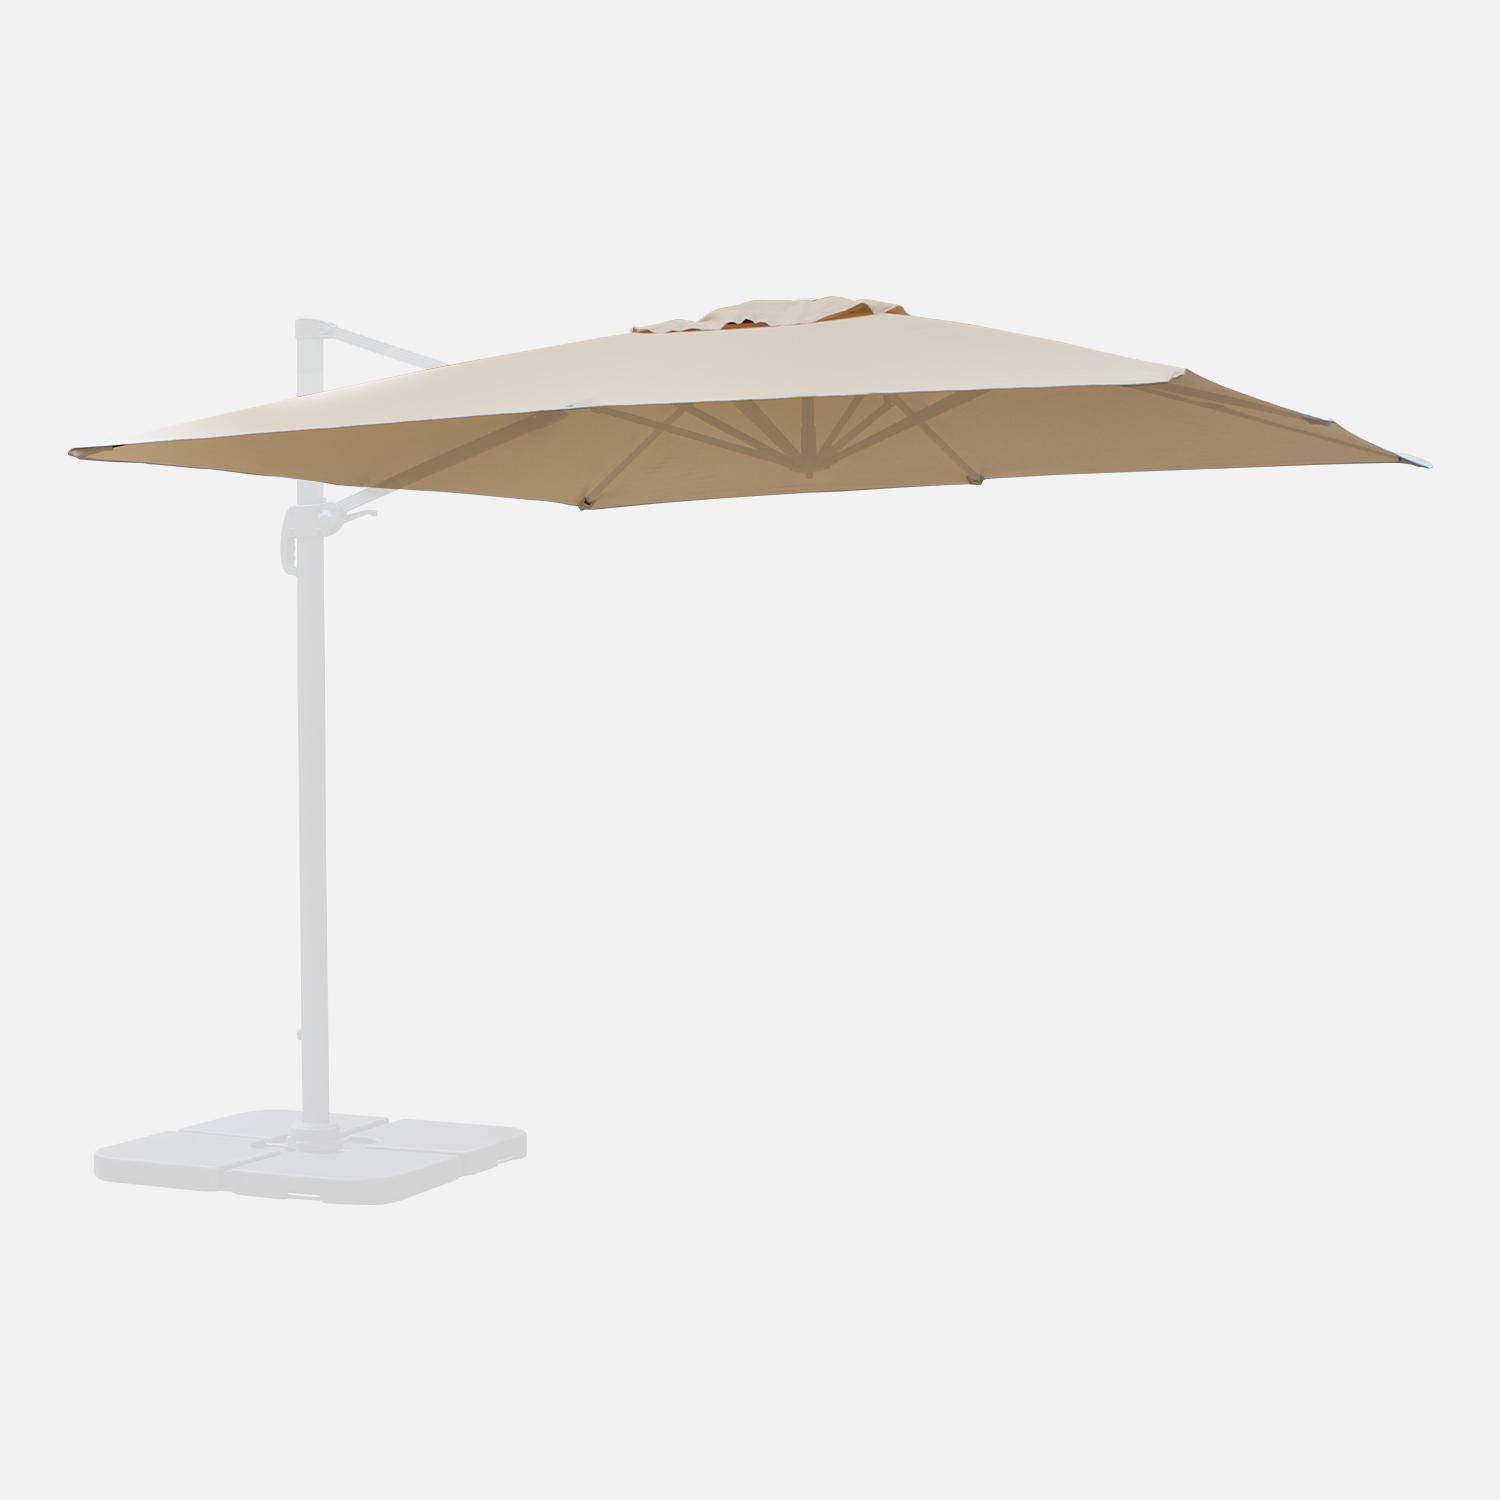 Beige 3x3m canopy for the Falgos parasol - replacement canopy Photo3